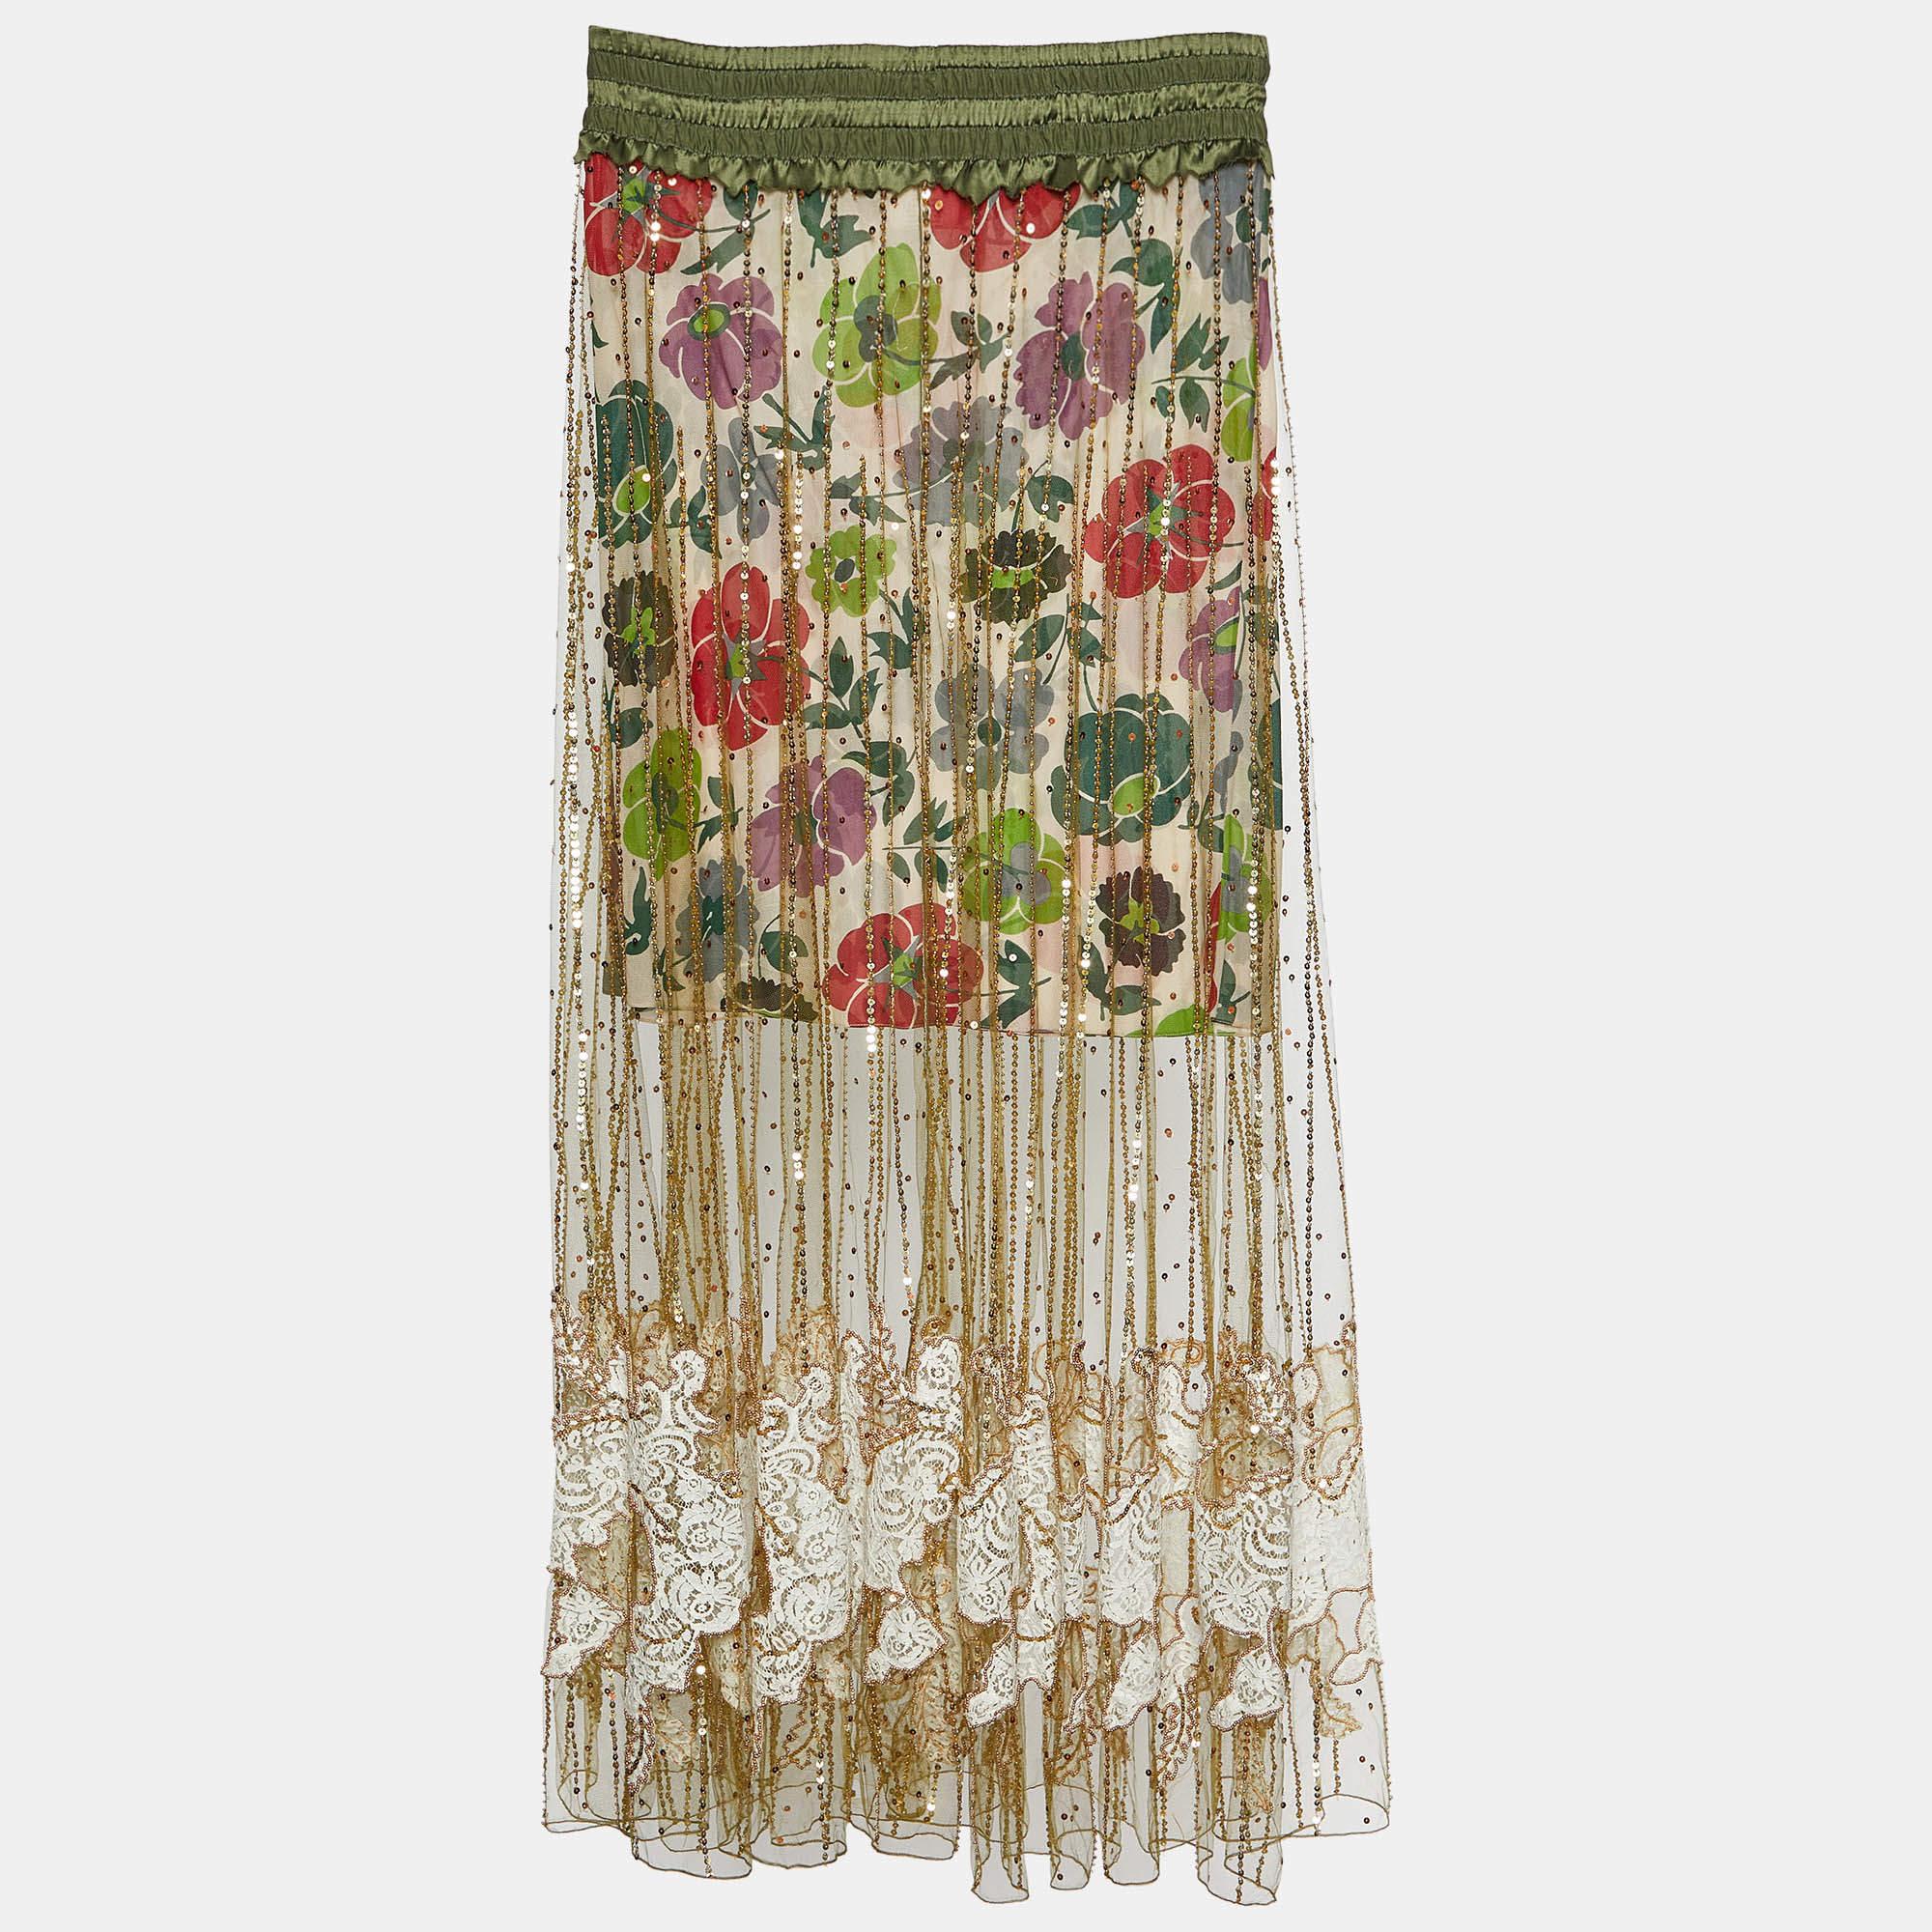 The Christian Dior skirt is a breathtaking piece of fashion artistry. Featuring a luxurious gold tulle overlay adorned with vibrant floral prints, this skirt is elegantly lined with silk, creating a stunning and romantic look for any special